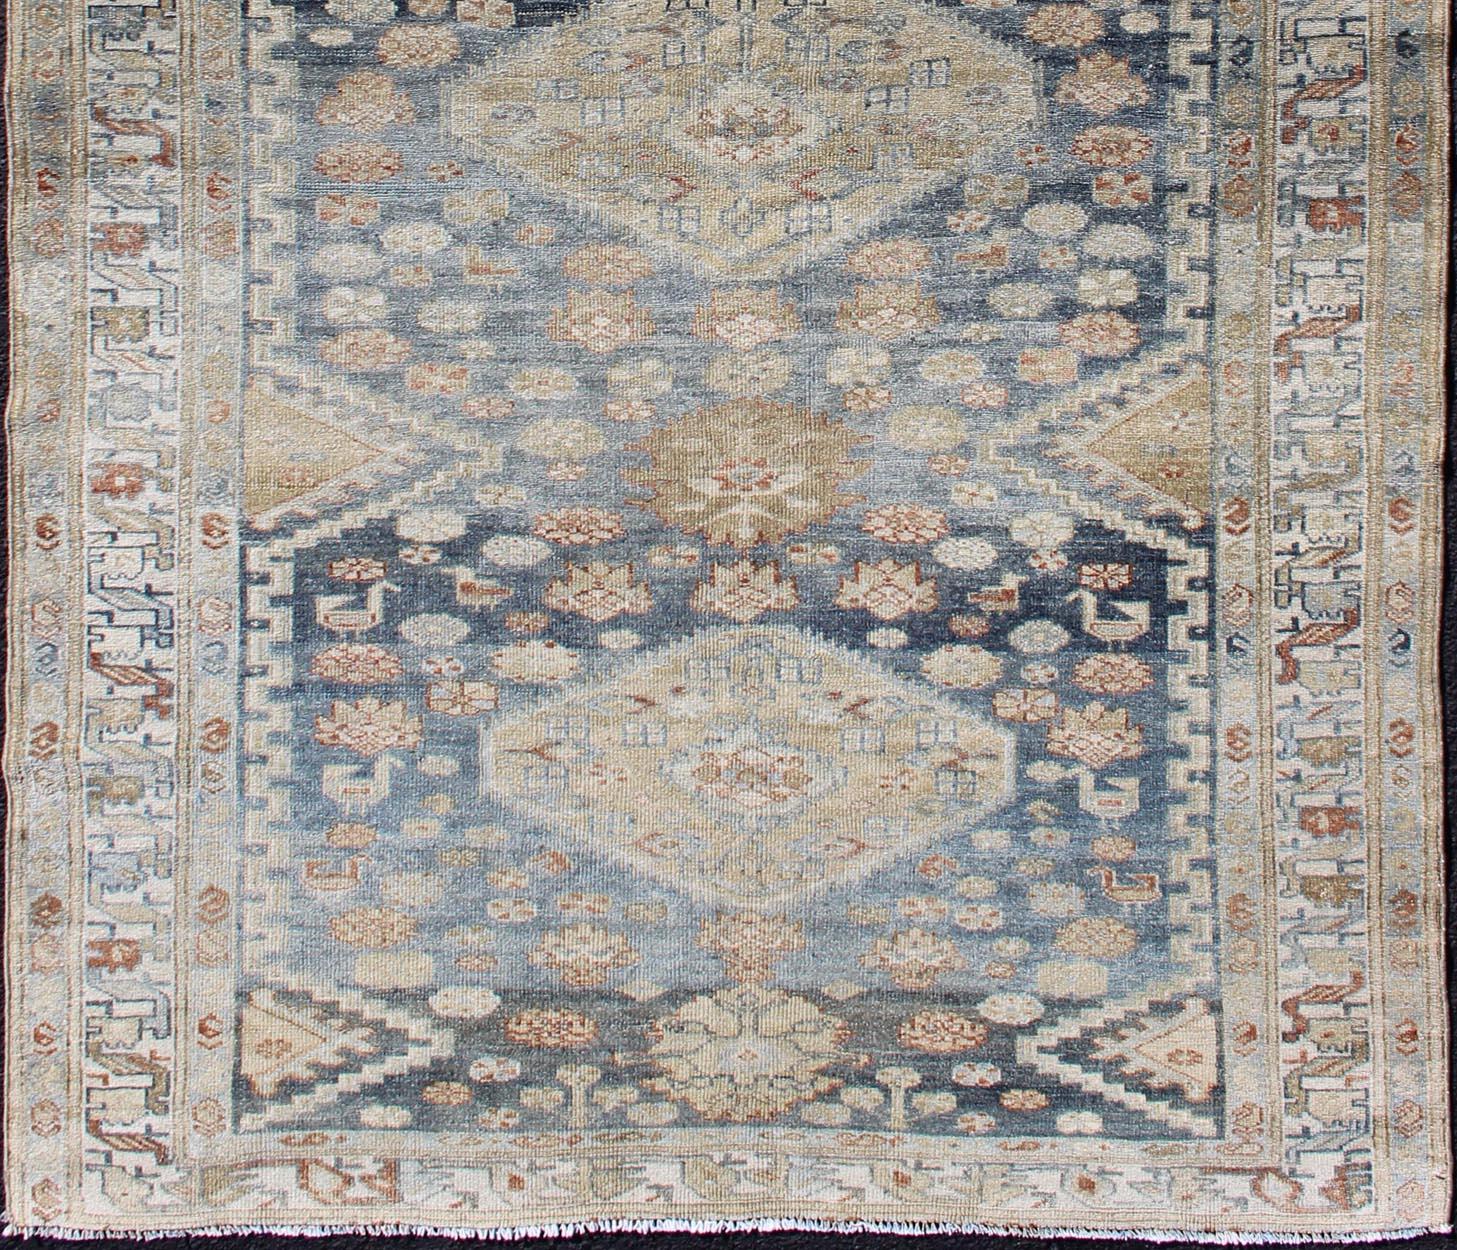 Hand-Knotted Tribal Persian Malayer Rug with Geometric Design in Steel Blue and Tan Tones